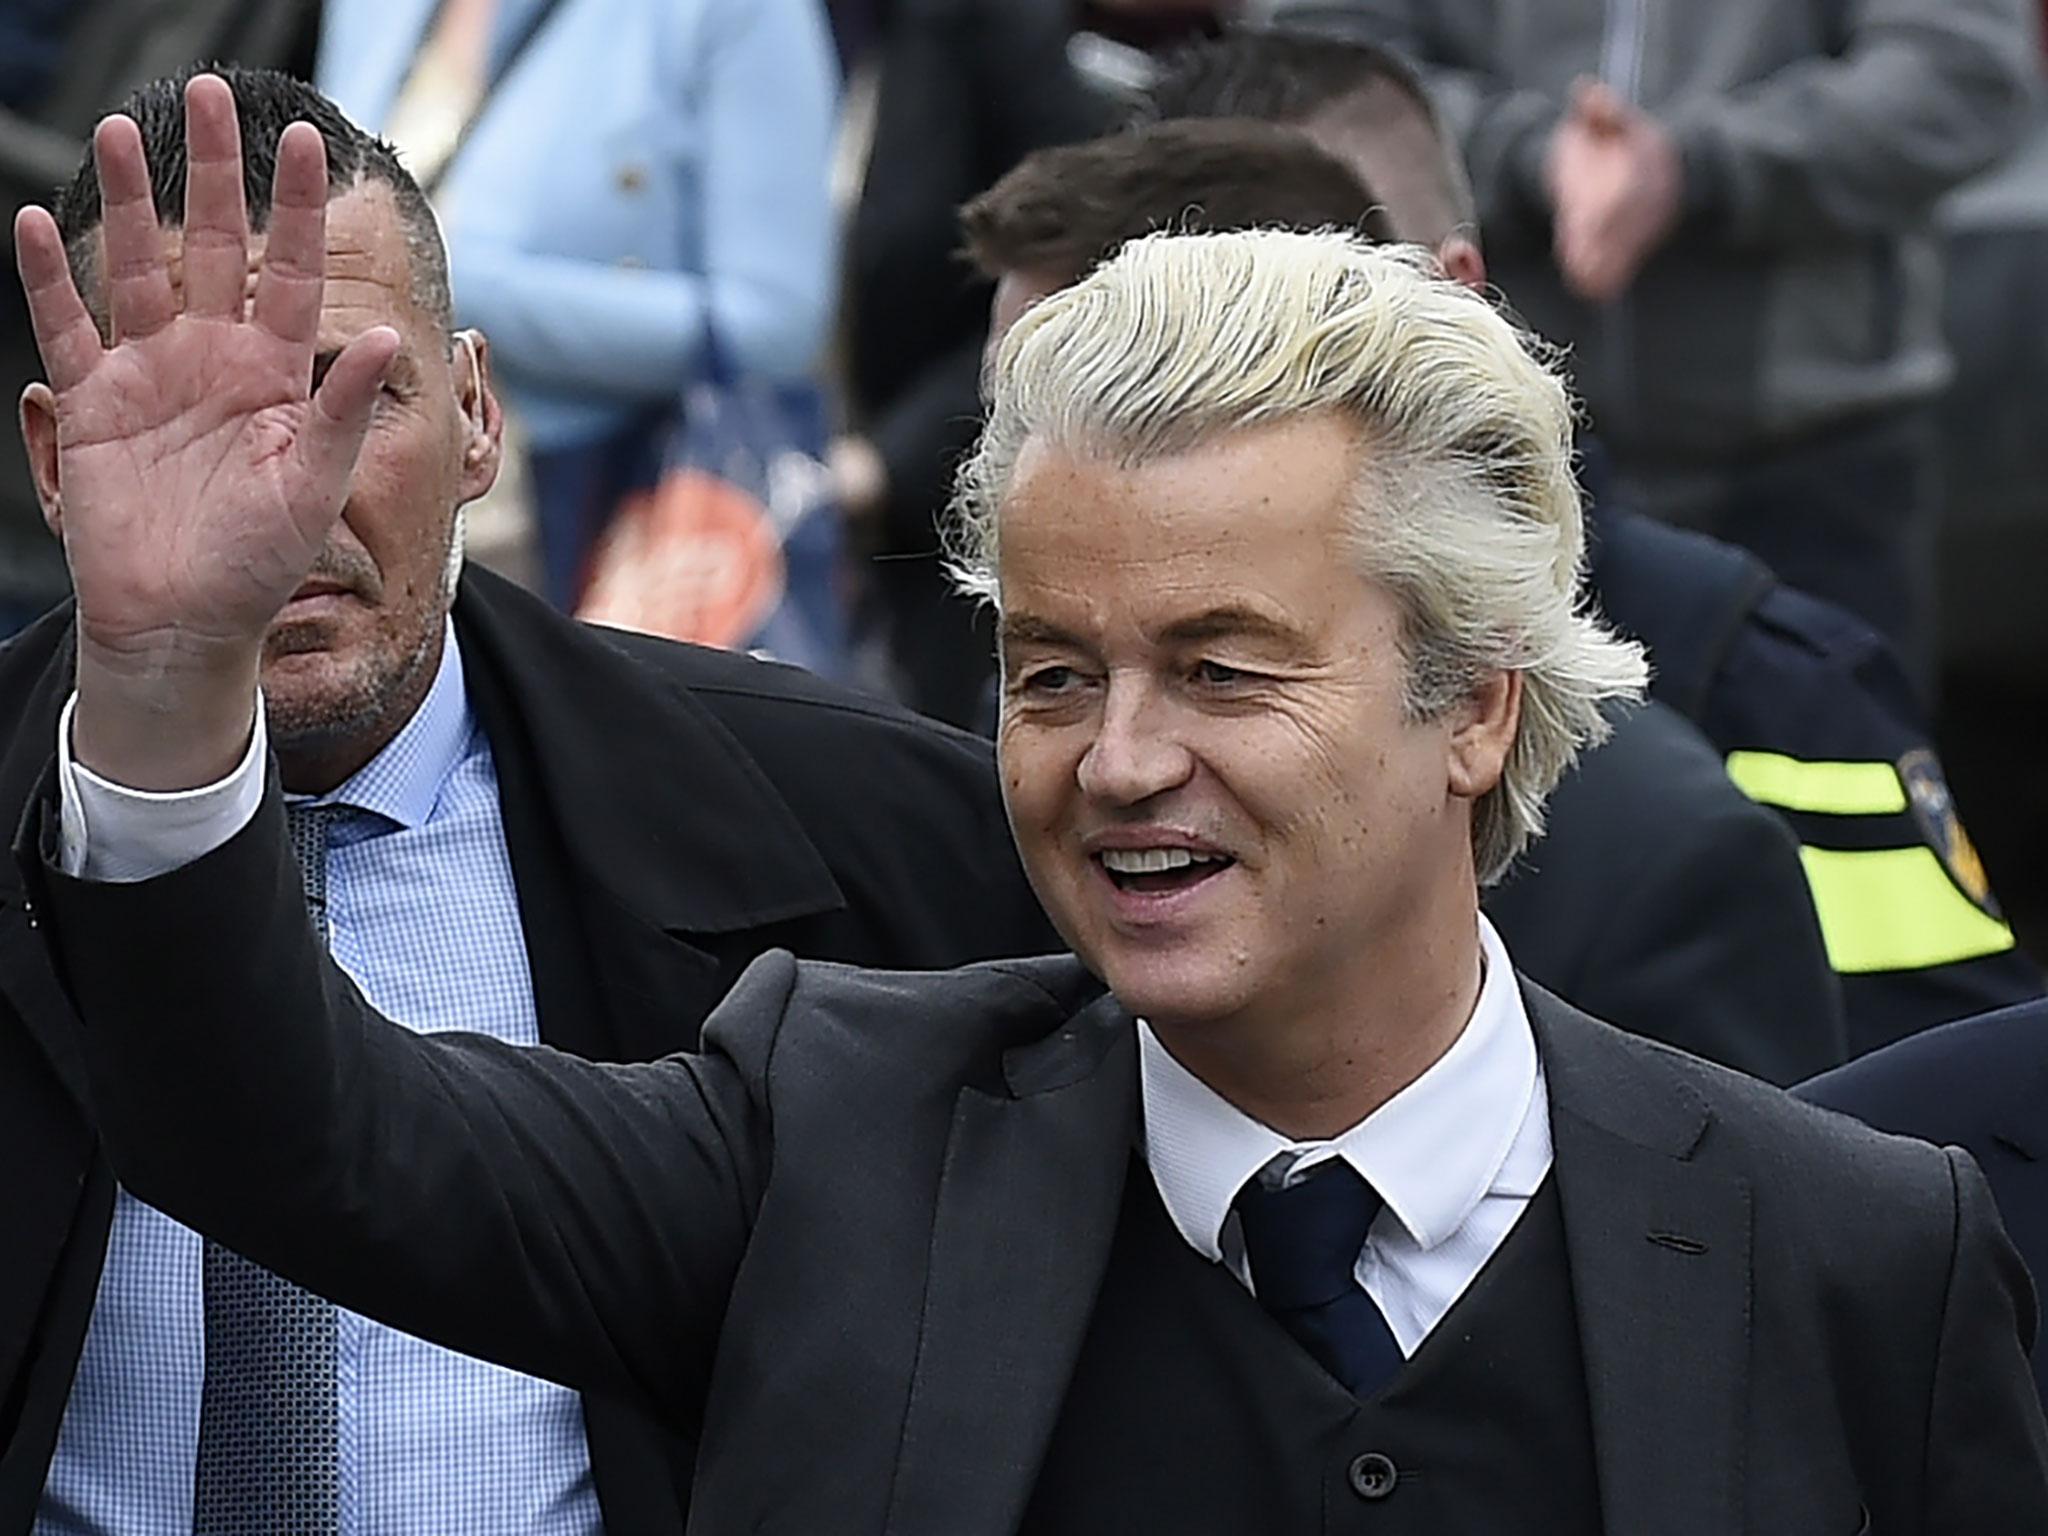 Far right politician Geert Wilders has been running neck and neck with the Netherlands’s Prime Minister